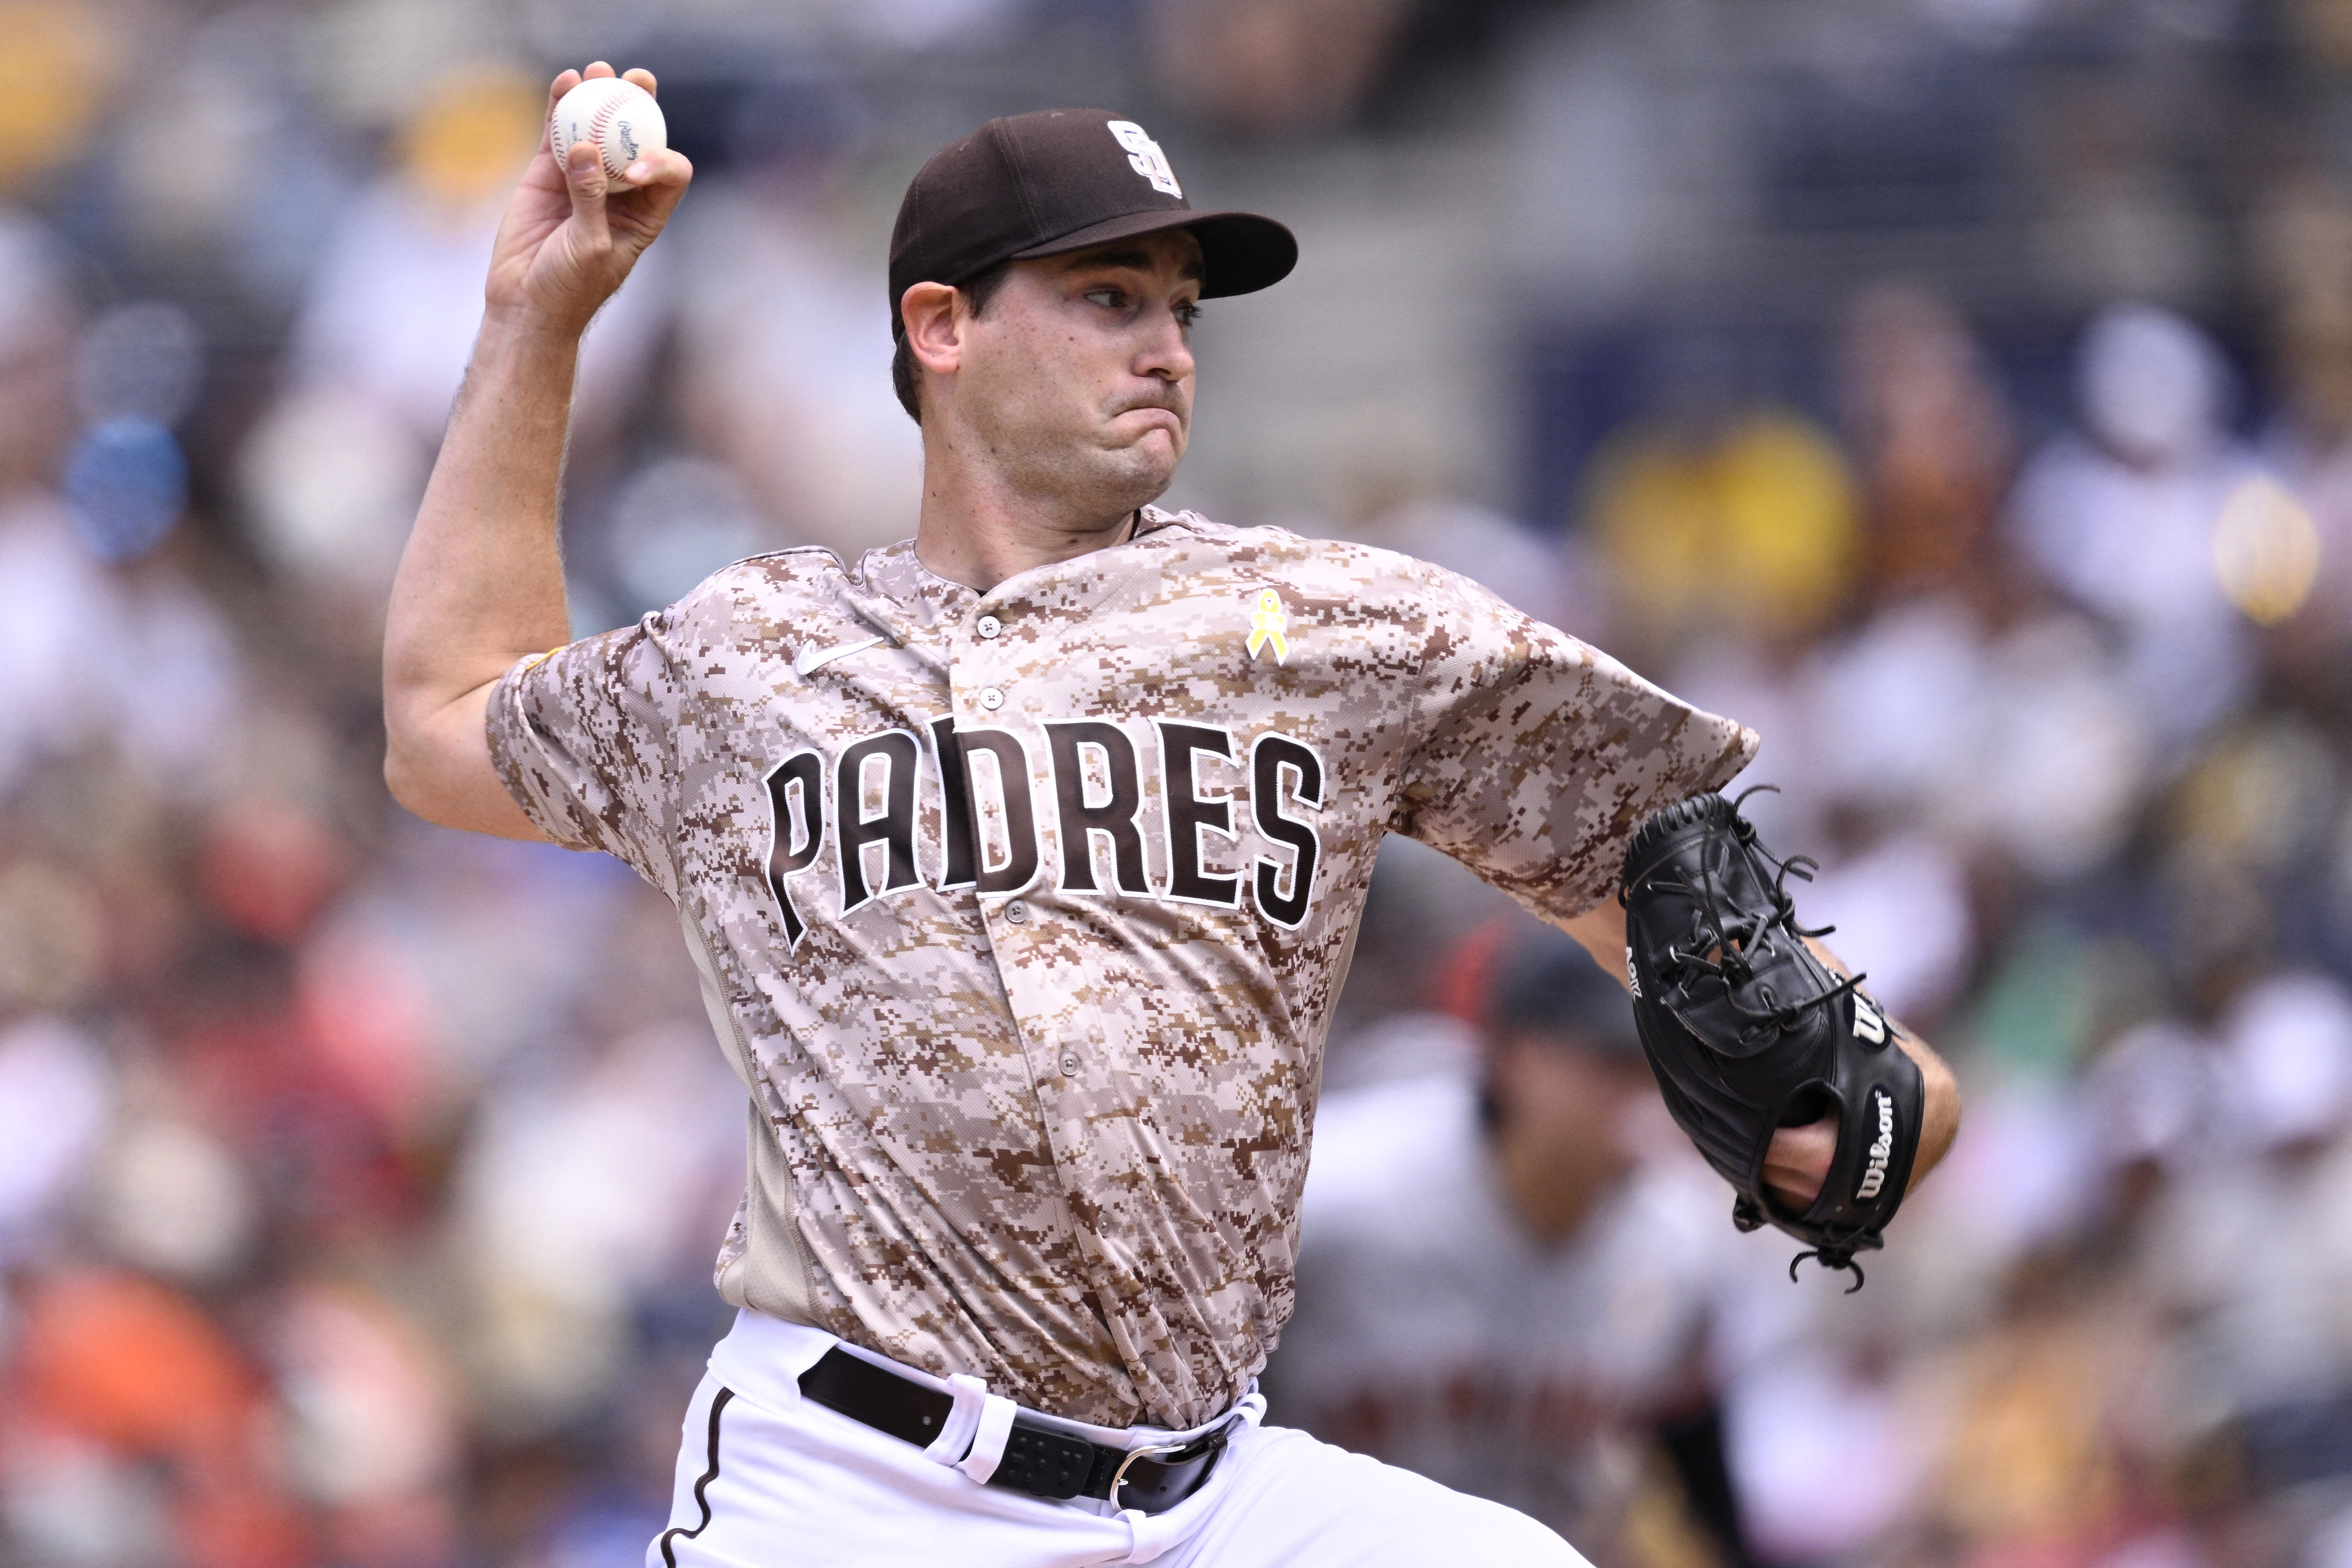 Acquisition of Soto, others push Padres closer to Dodgers' level